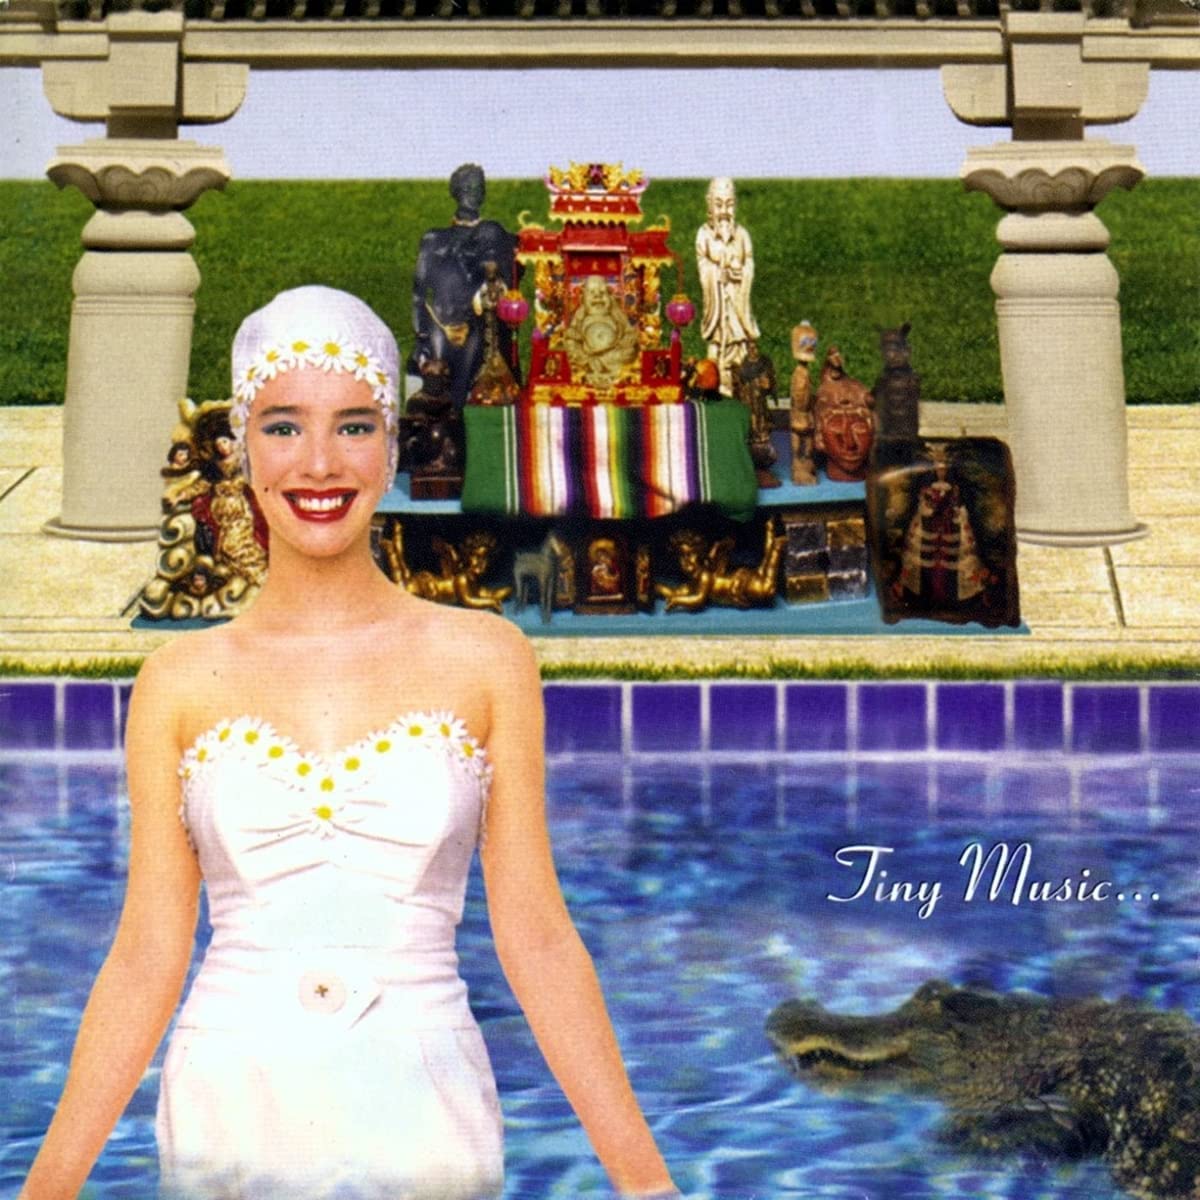 Stone Temple Pilots - Tiny Music... Songs From The Vatican Gift Shop - 3CD/LP